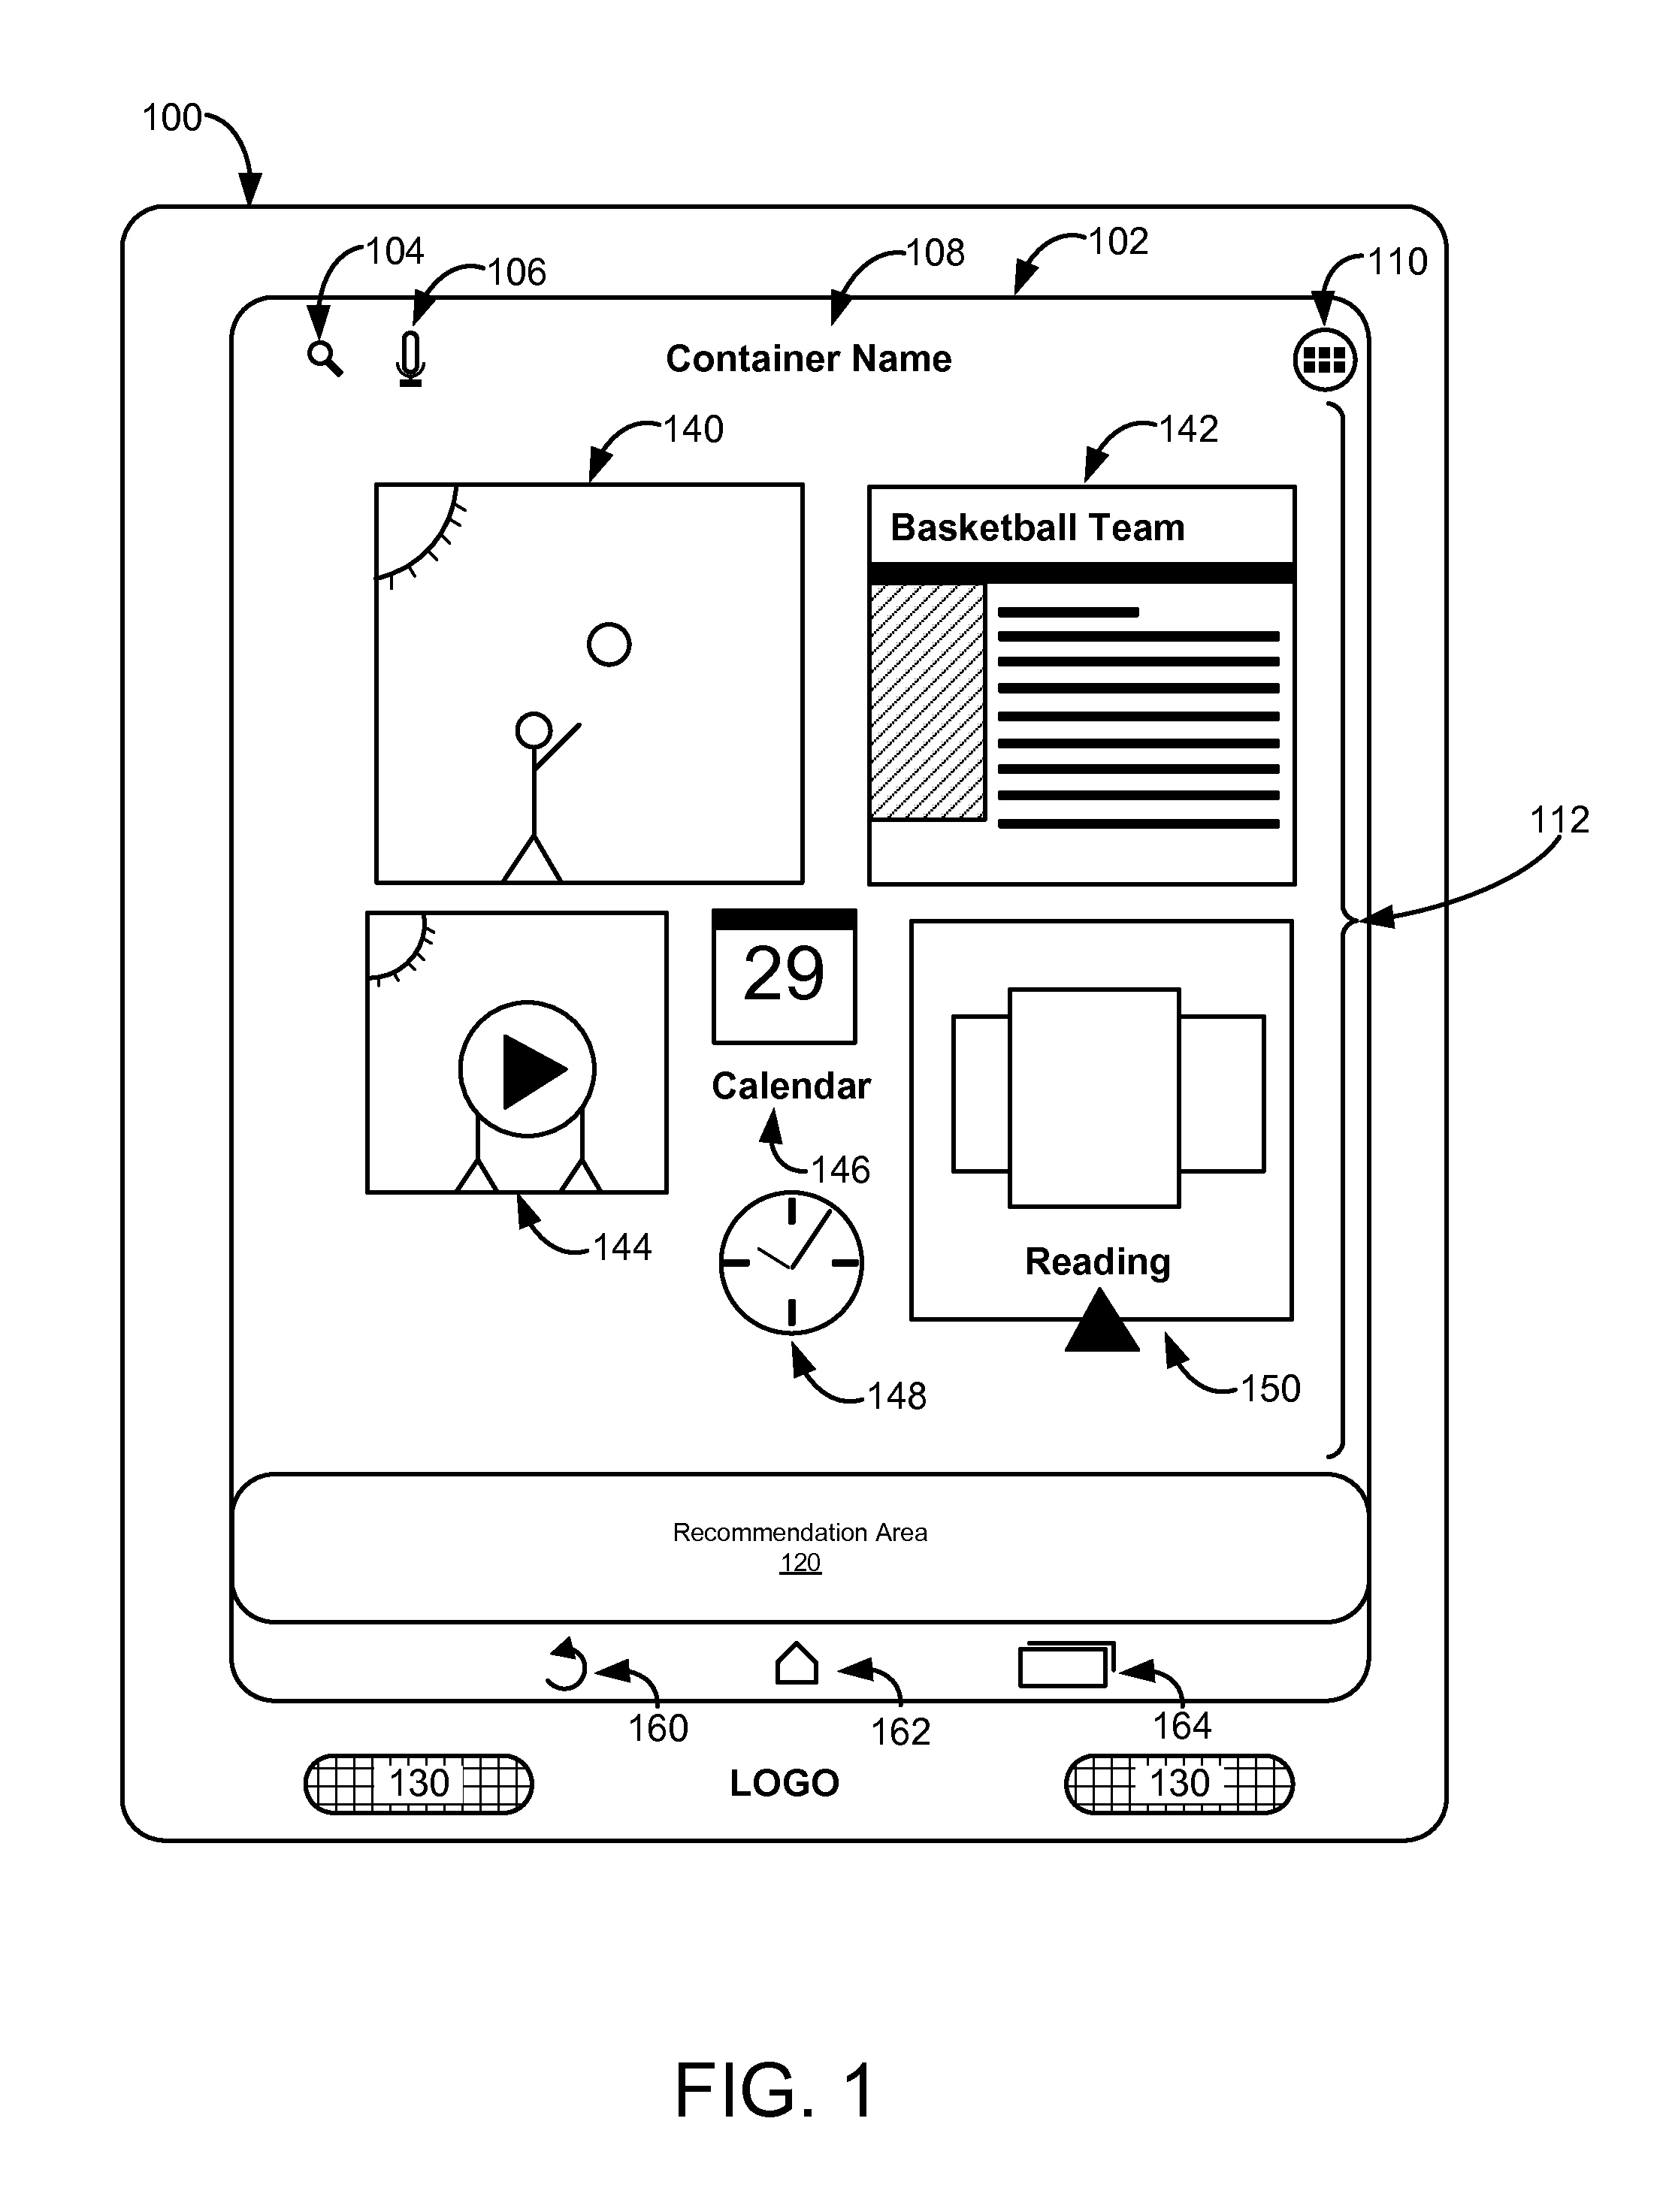 System and method for a graphical user interface having a resizable recommendations area